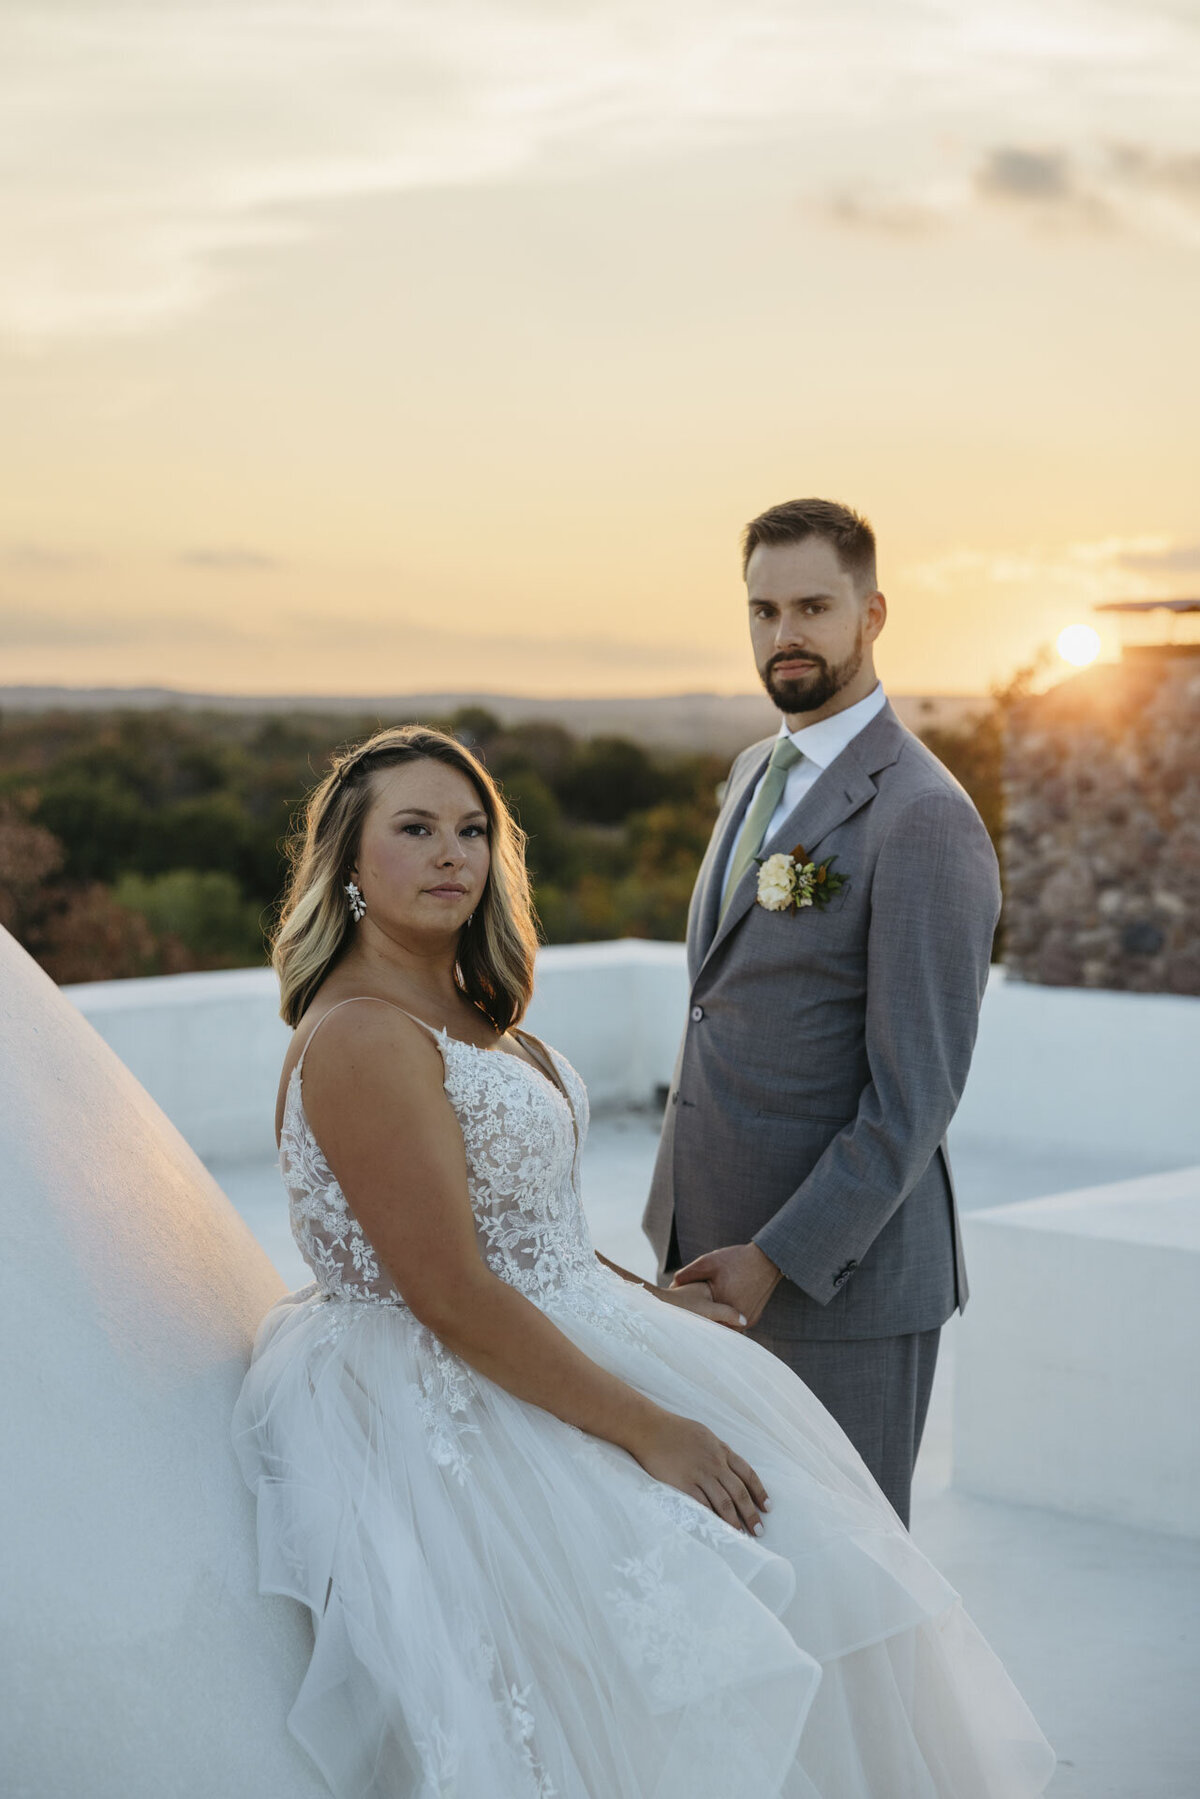 earth-to-madison-dallas-wedding-photographer-for-unique-couples38